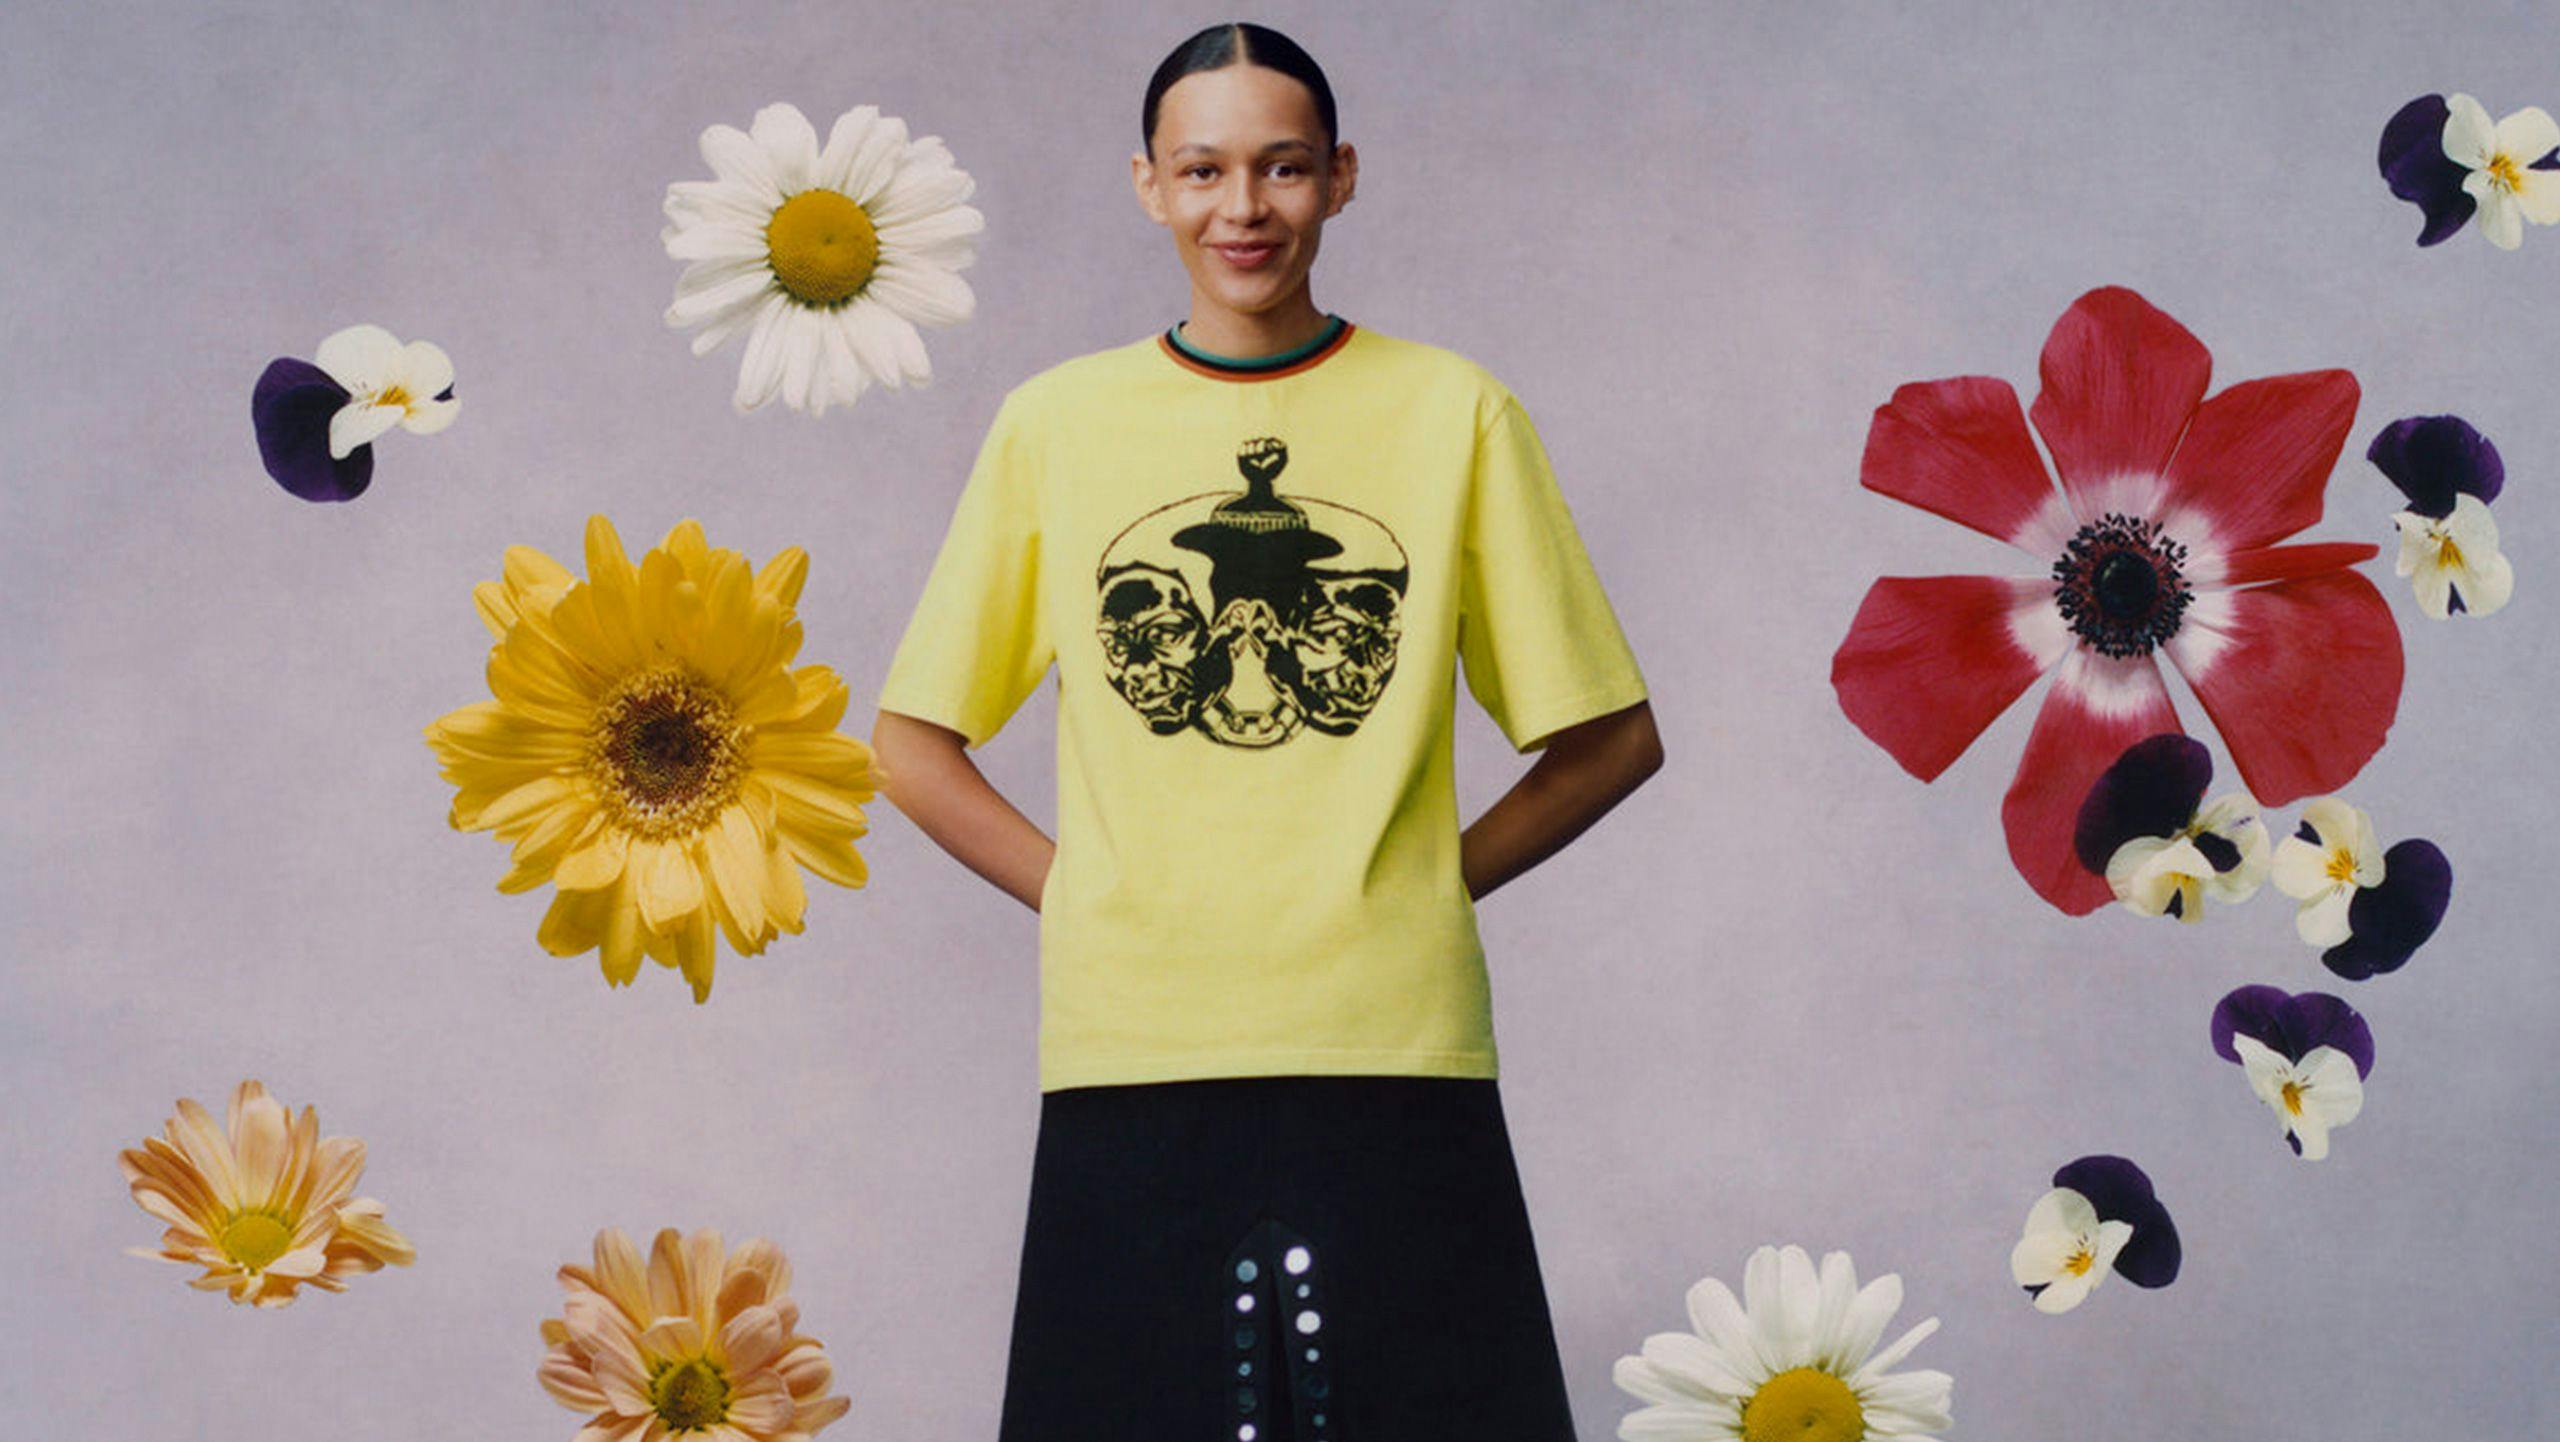 A detail of a photograph by Tyler Mitchell of Wales Bonner and Kerry James Marshall’s limited edition capsule collection, featuring a T-shirt with an original artwork by Marshall created for the collaboration, dated 2022.